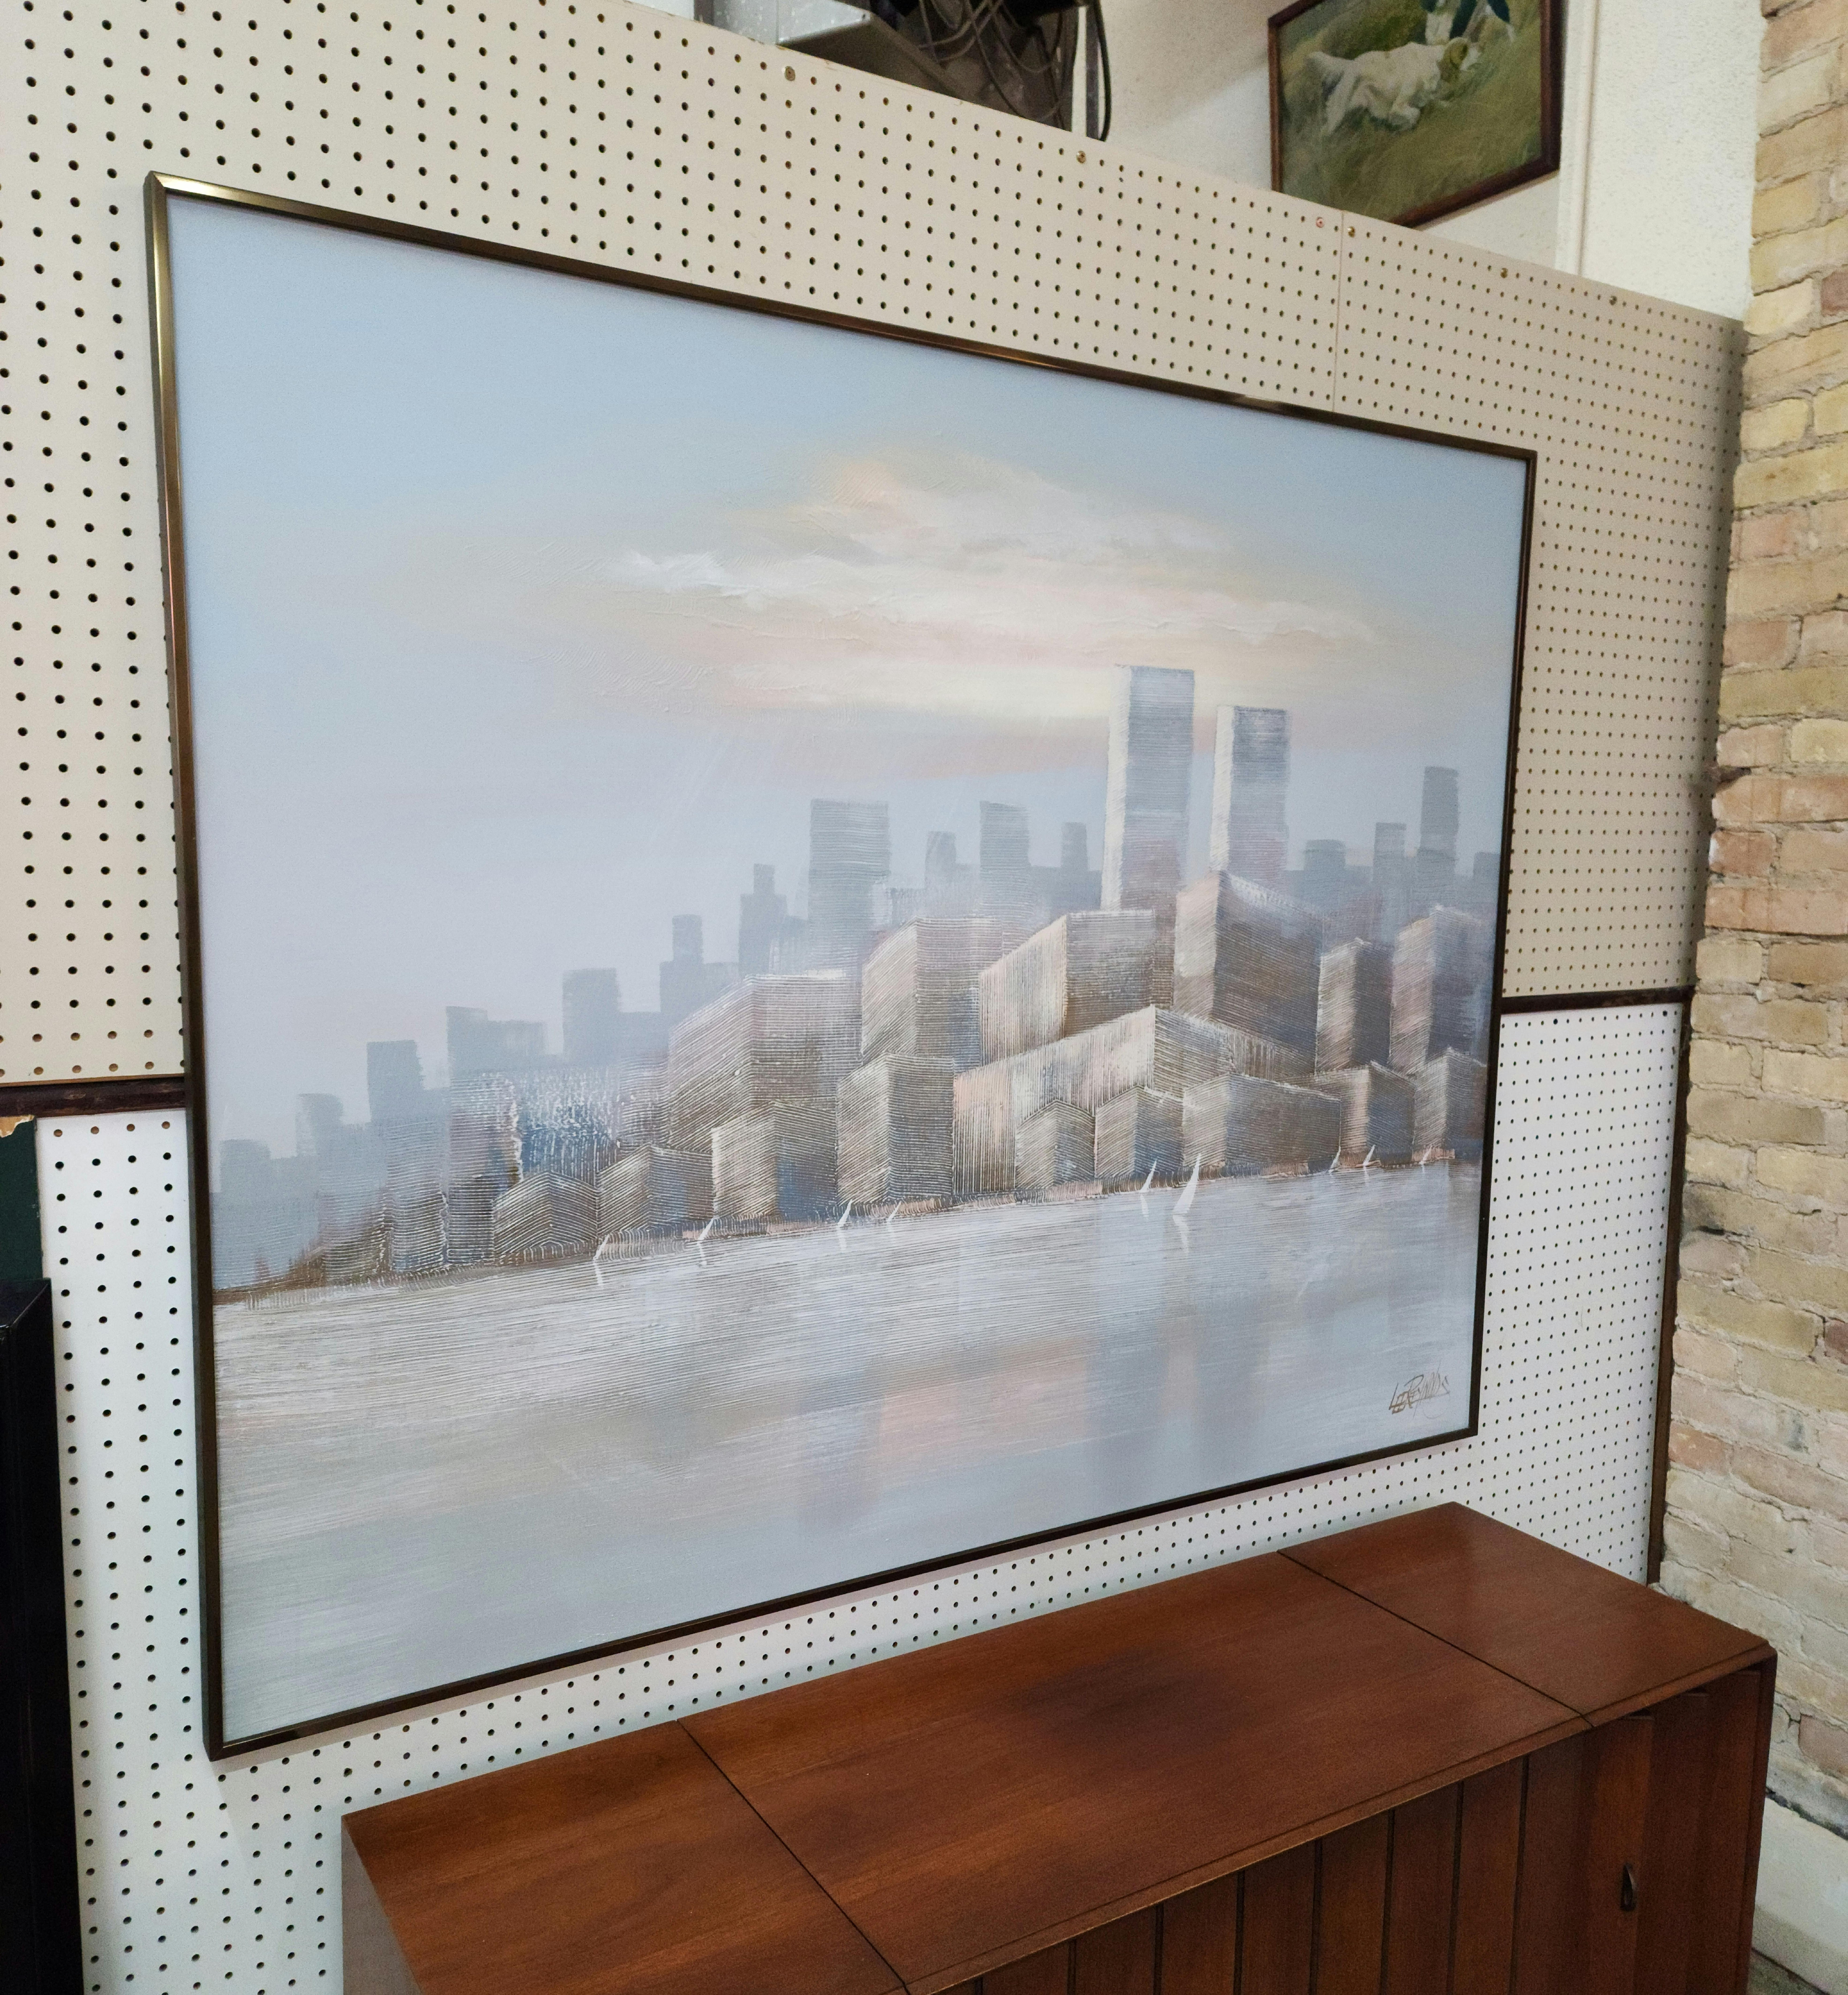 This extraordinary Mid-Century Modern abstract cityscape has a unique skyline resting along an active waterfront with sailboats. Large scale approx. 4ft x 5ft is reminiscent of work by Lee Reynolds. The heavily textured array of skyscrapers employs